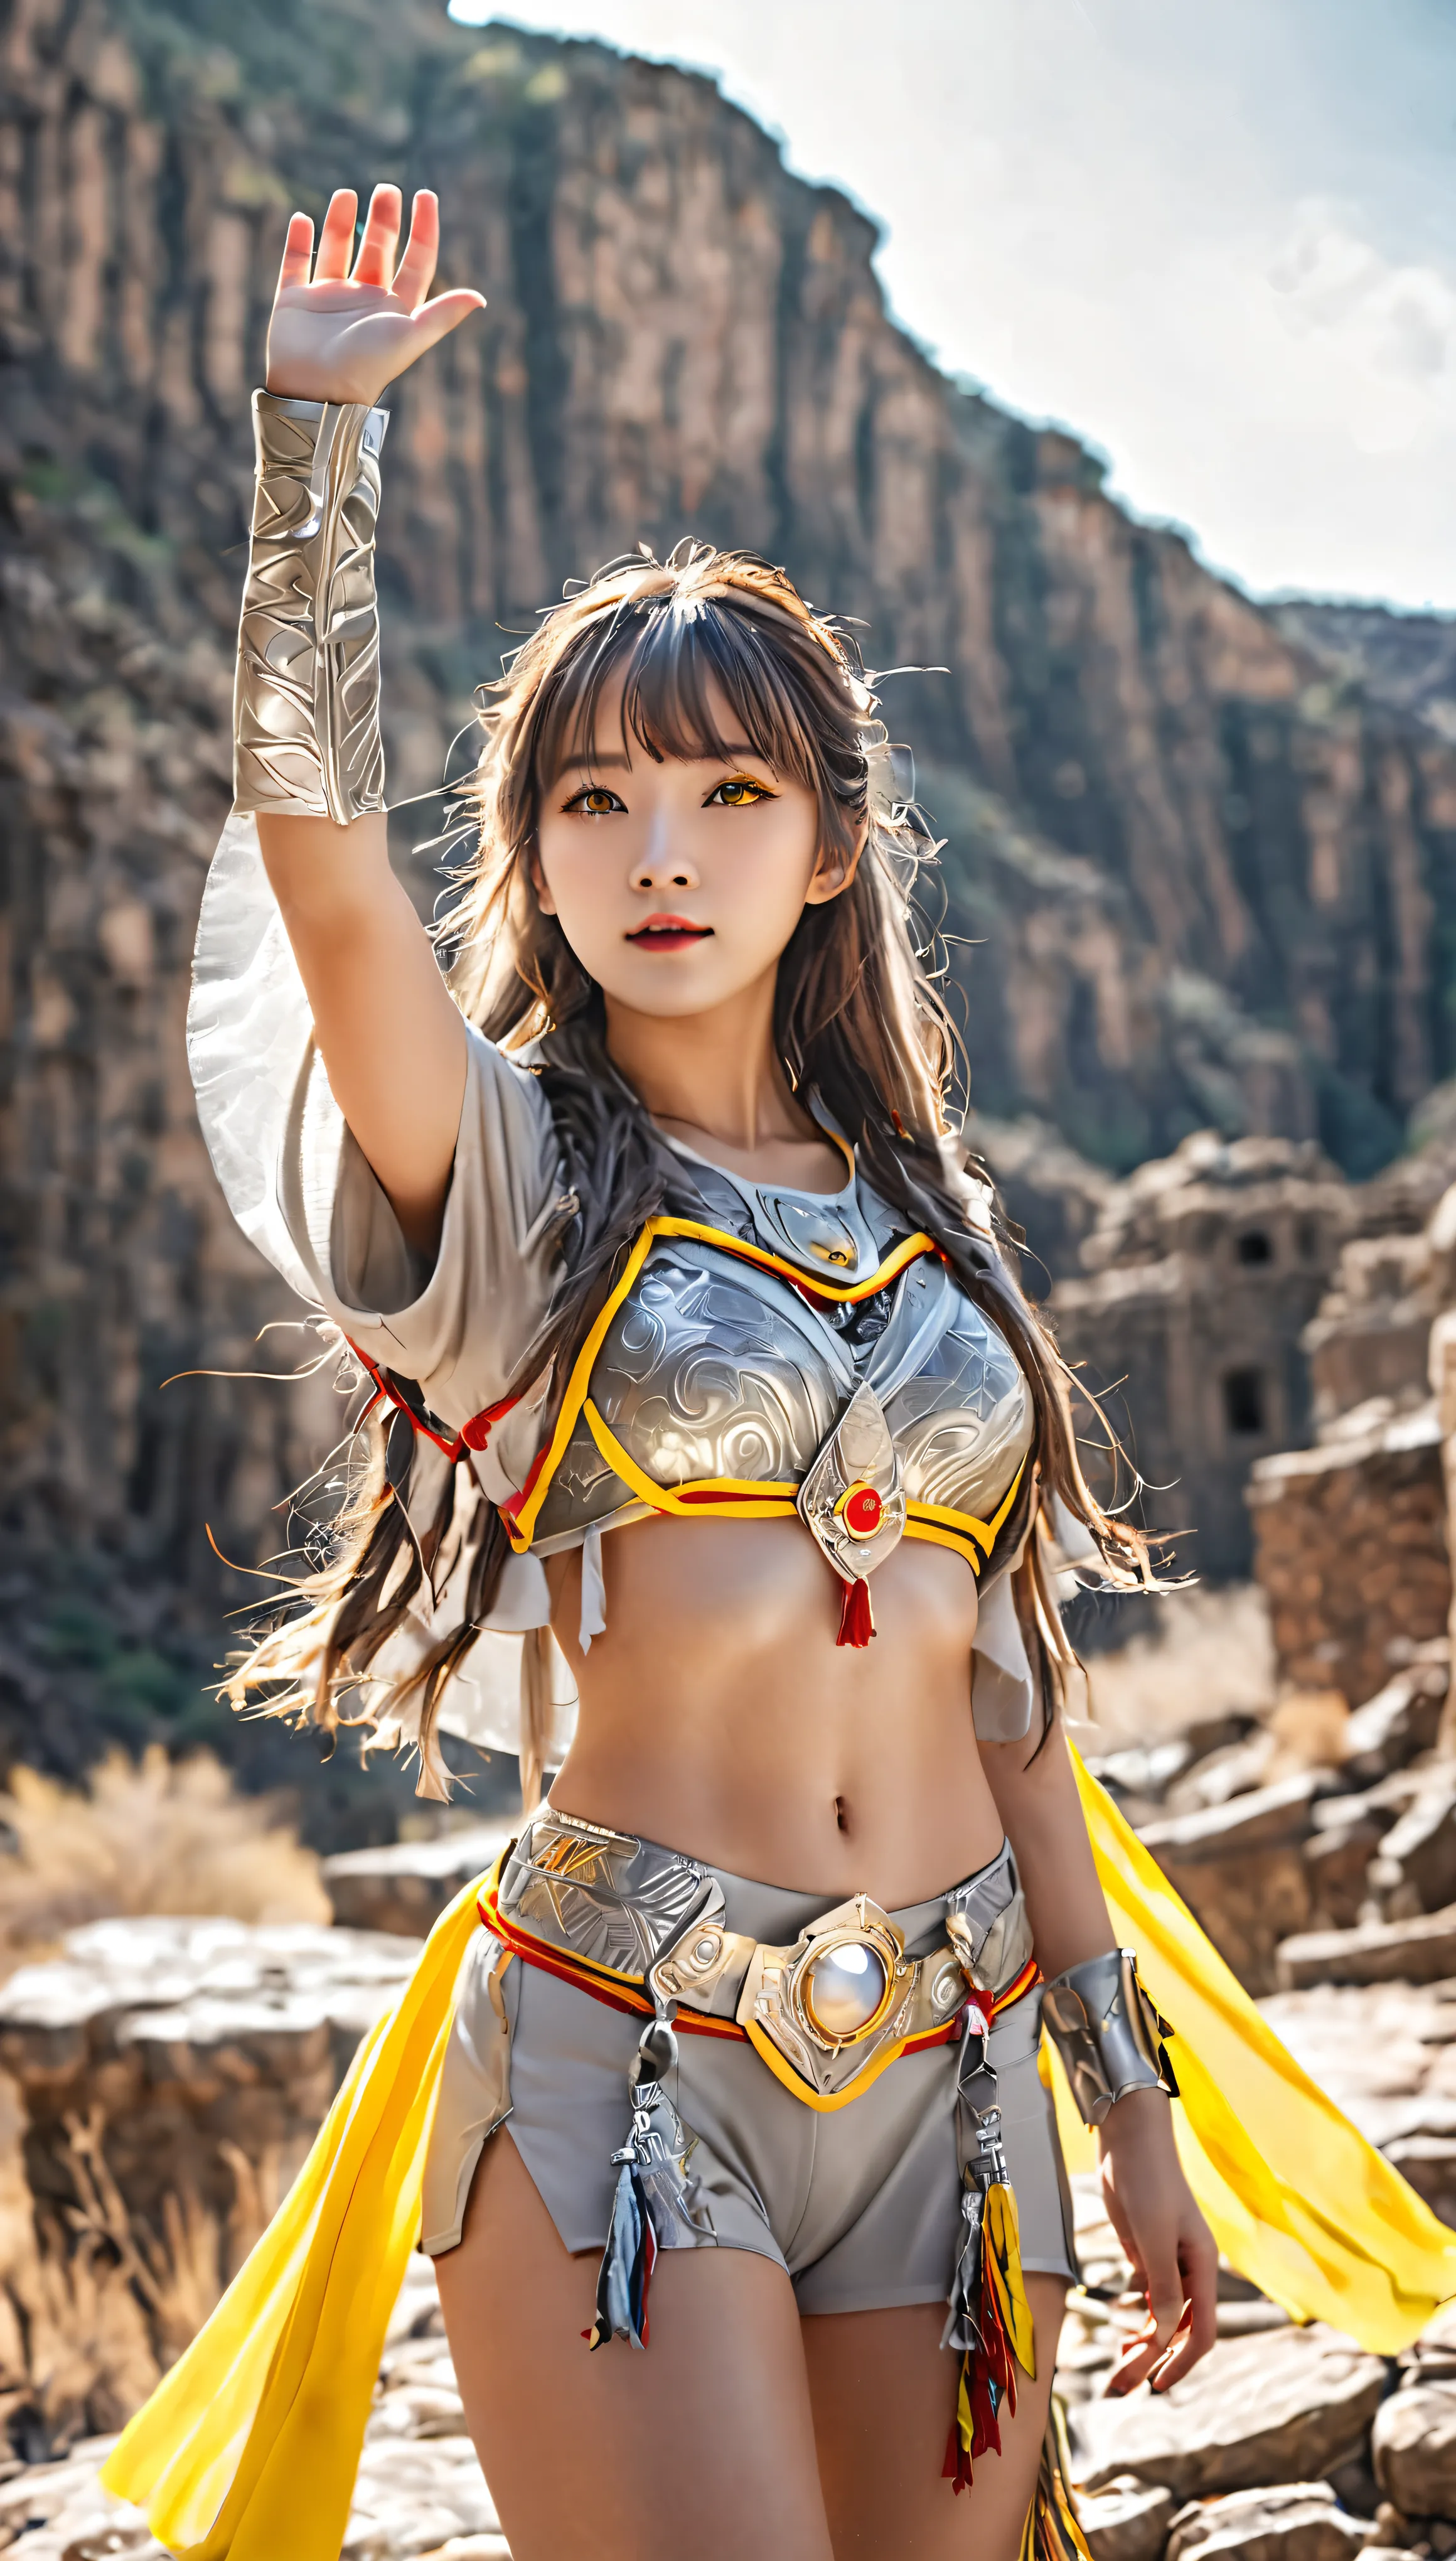 Bright Shot:1.3)A lone girl raider dressed in a spectacular realistic costume、Standing triumphantly with one hand raised、Her yel...